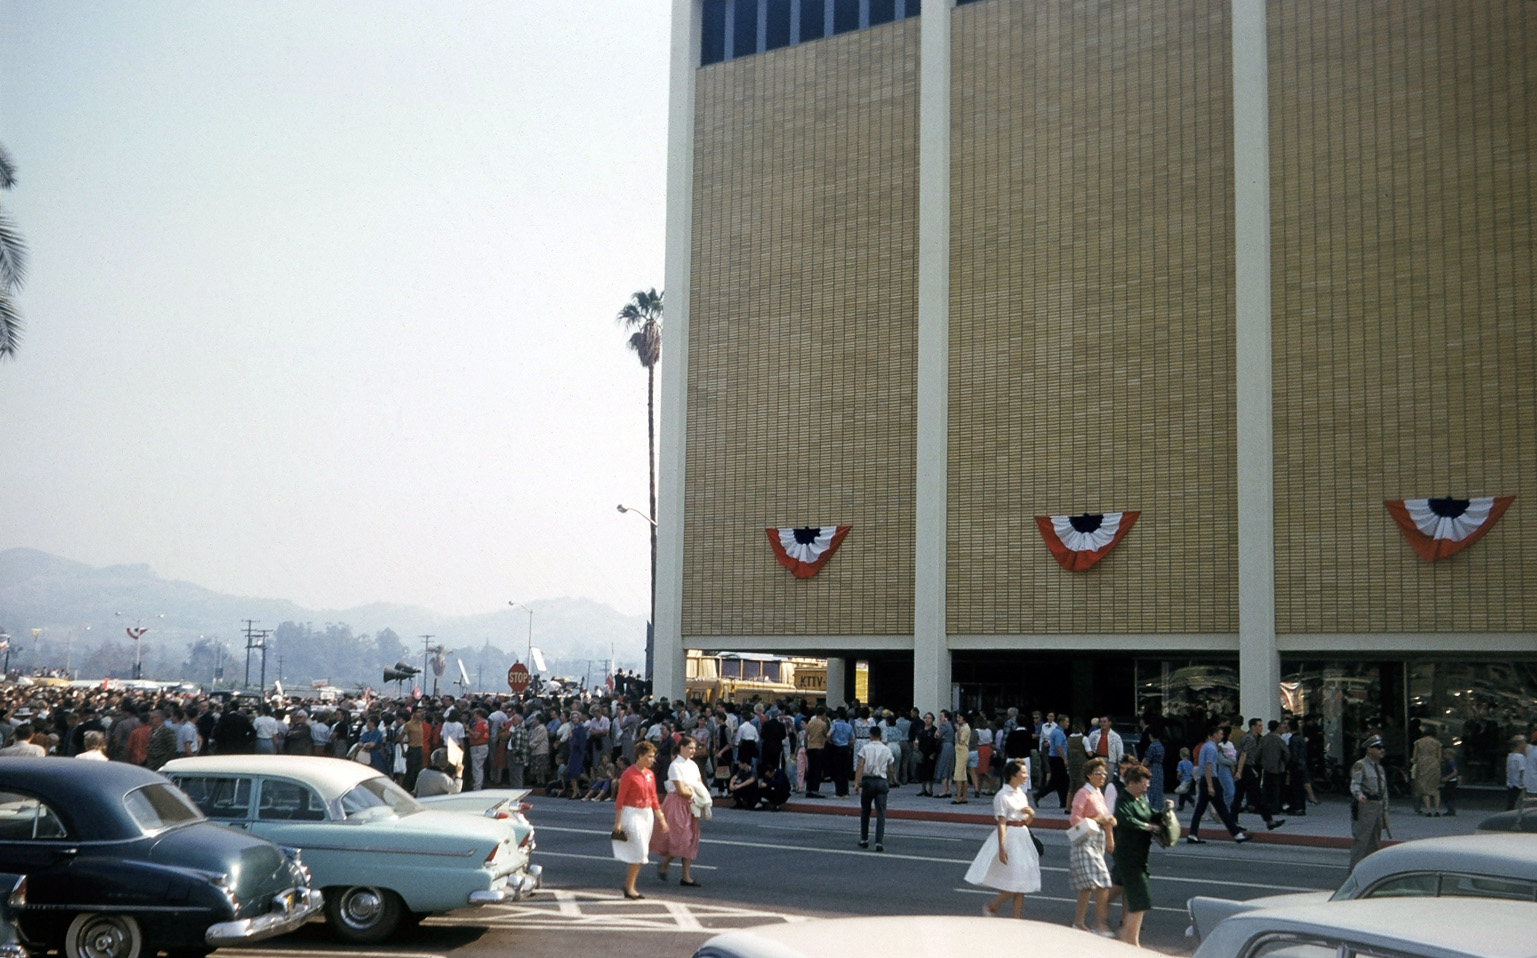 West Covina, California, 1960. My mother rushed me and my next door pal Dennis to the Eastland Shopping Center to hear Richard Nixon on his Presidential campaign swing through Southern California. The big store shown is May Company. When I was a teenager with a job, I bought my school clothes there. This would be 12 or 13 years later. Eastland is there today, looking quite different! Here's another post of Dennis and me on the hood of my mom's car at this event. View full size.